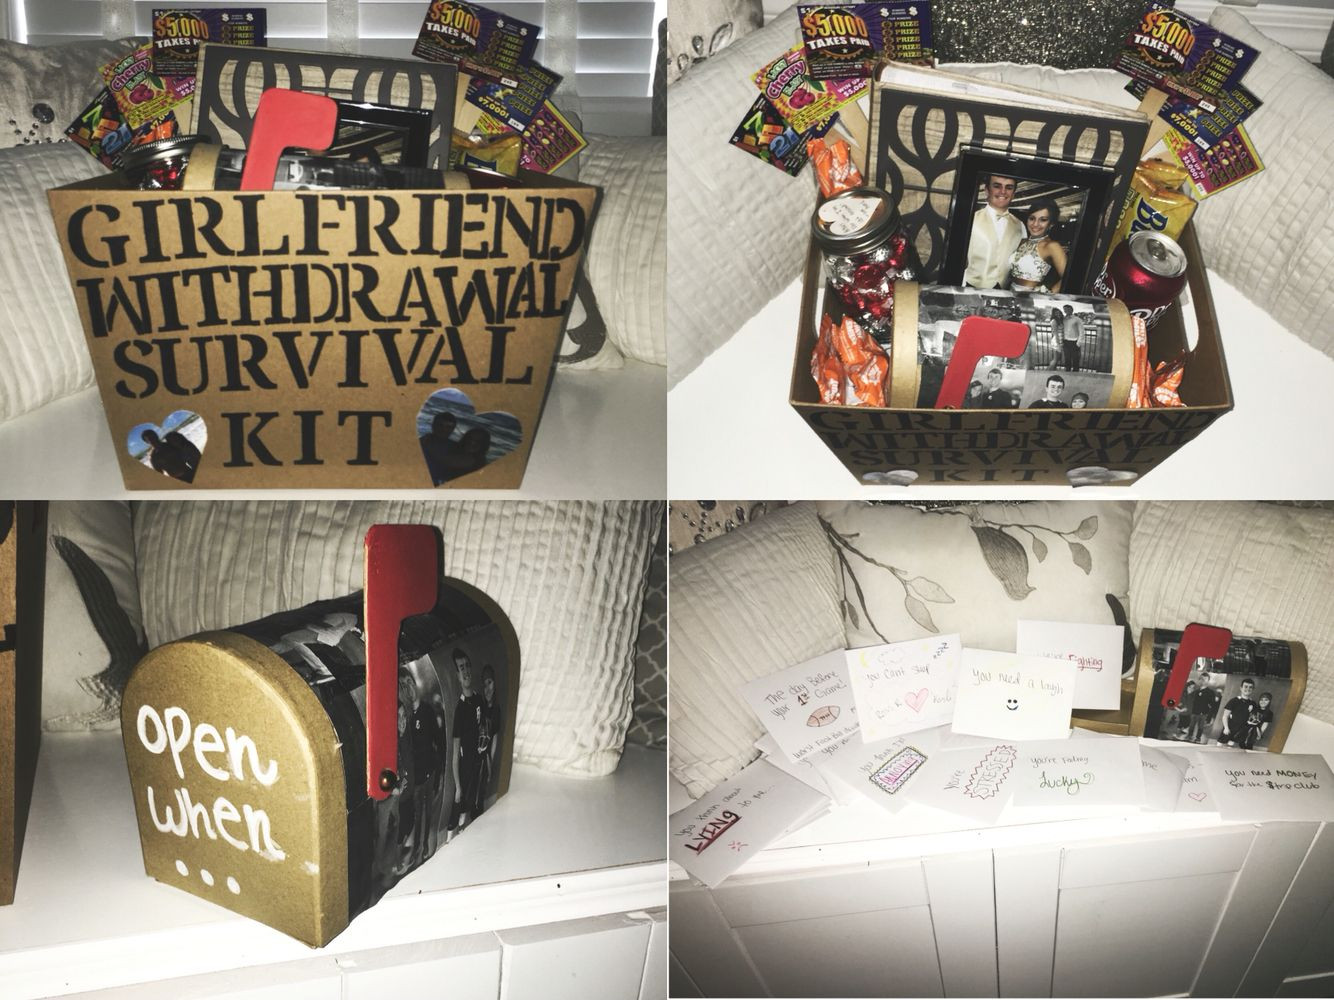 DIY Christmas Gifts For Wife
 Girlfriend withdrawal survival kit and open when letters t idea for boyfriend leaving for